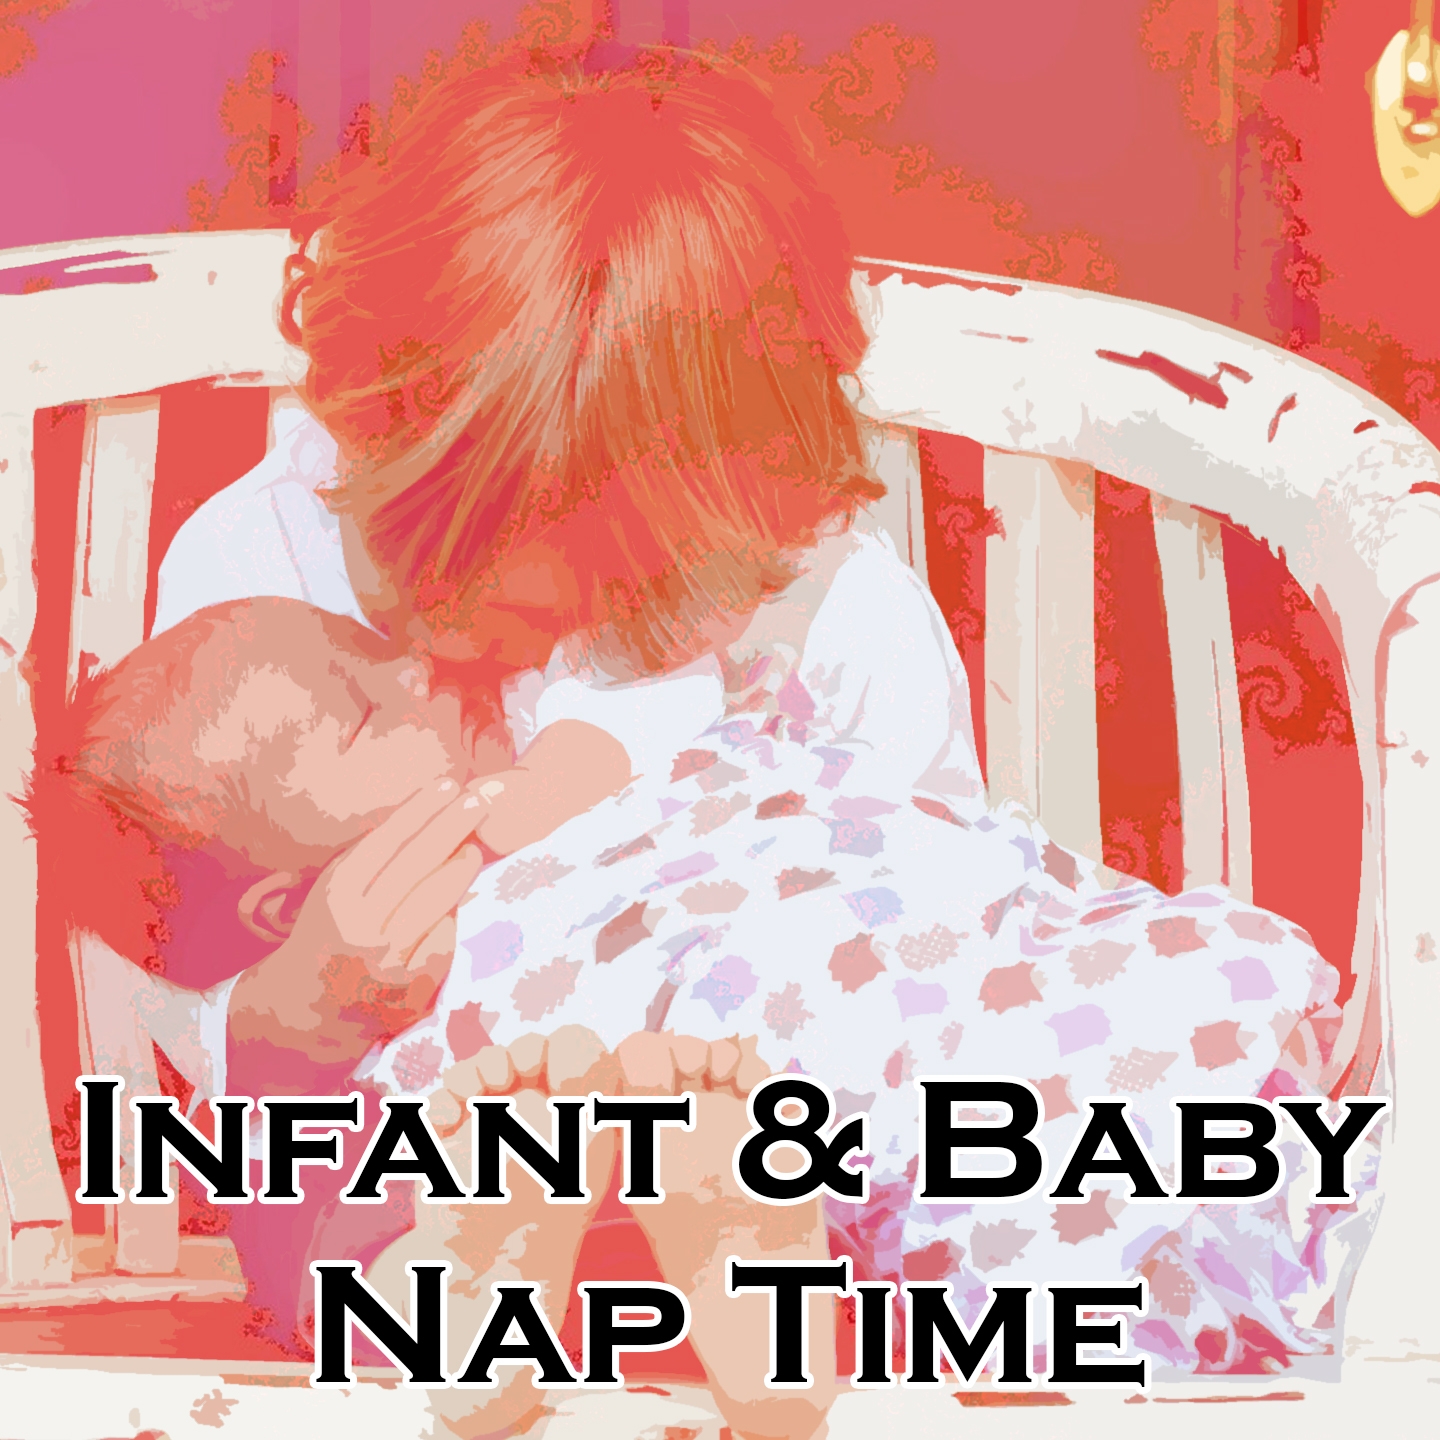 Infant & Baby Nap Time